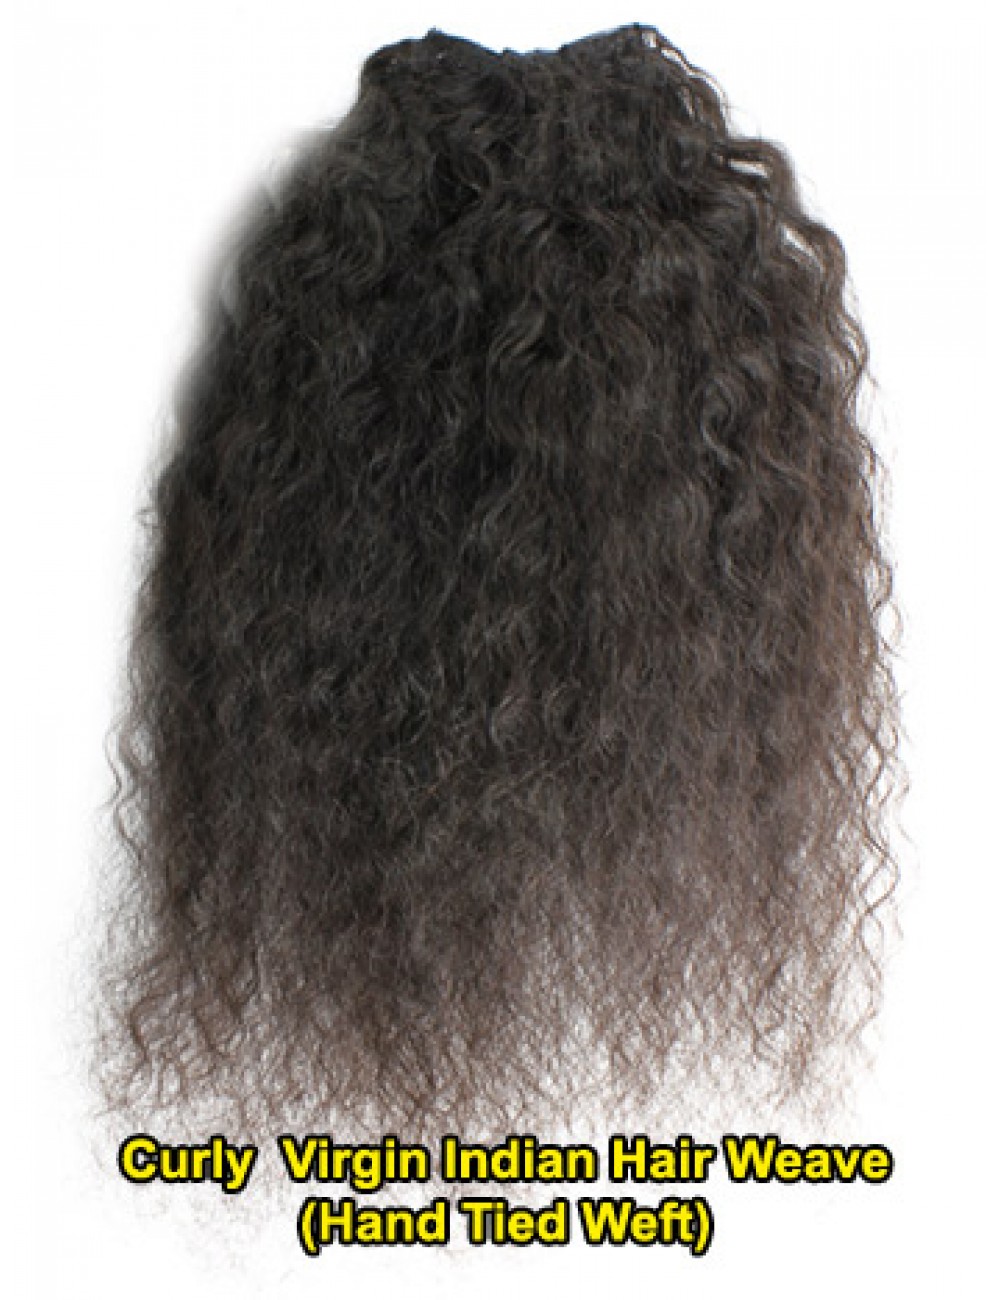 India Human Hair, India Human Hair Manufacturers and Suppliers